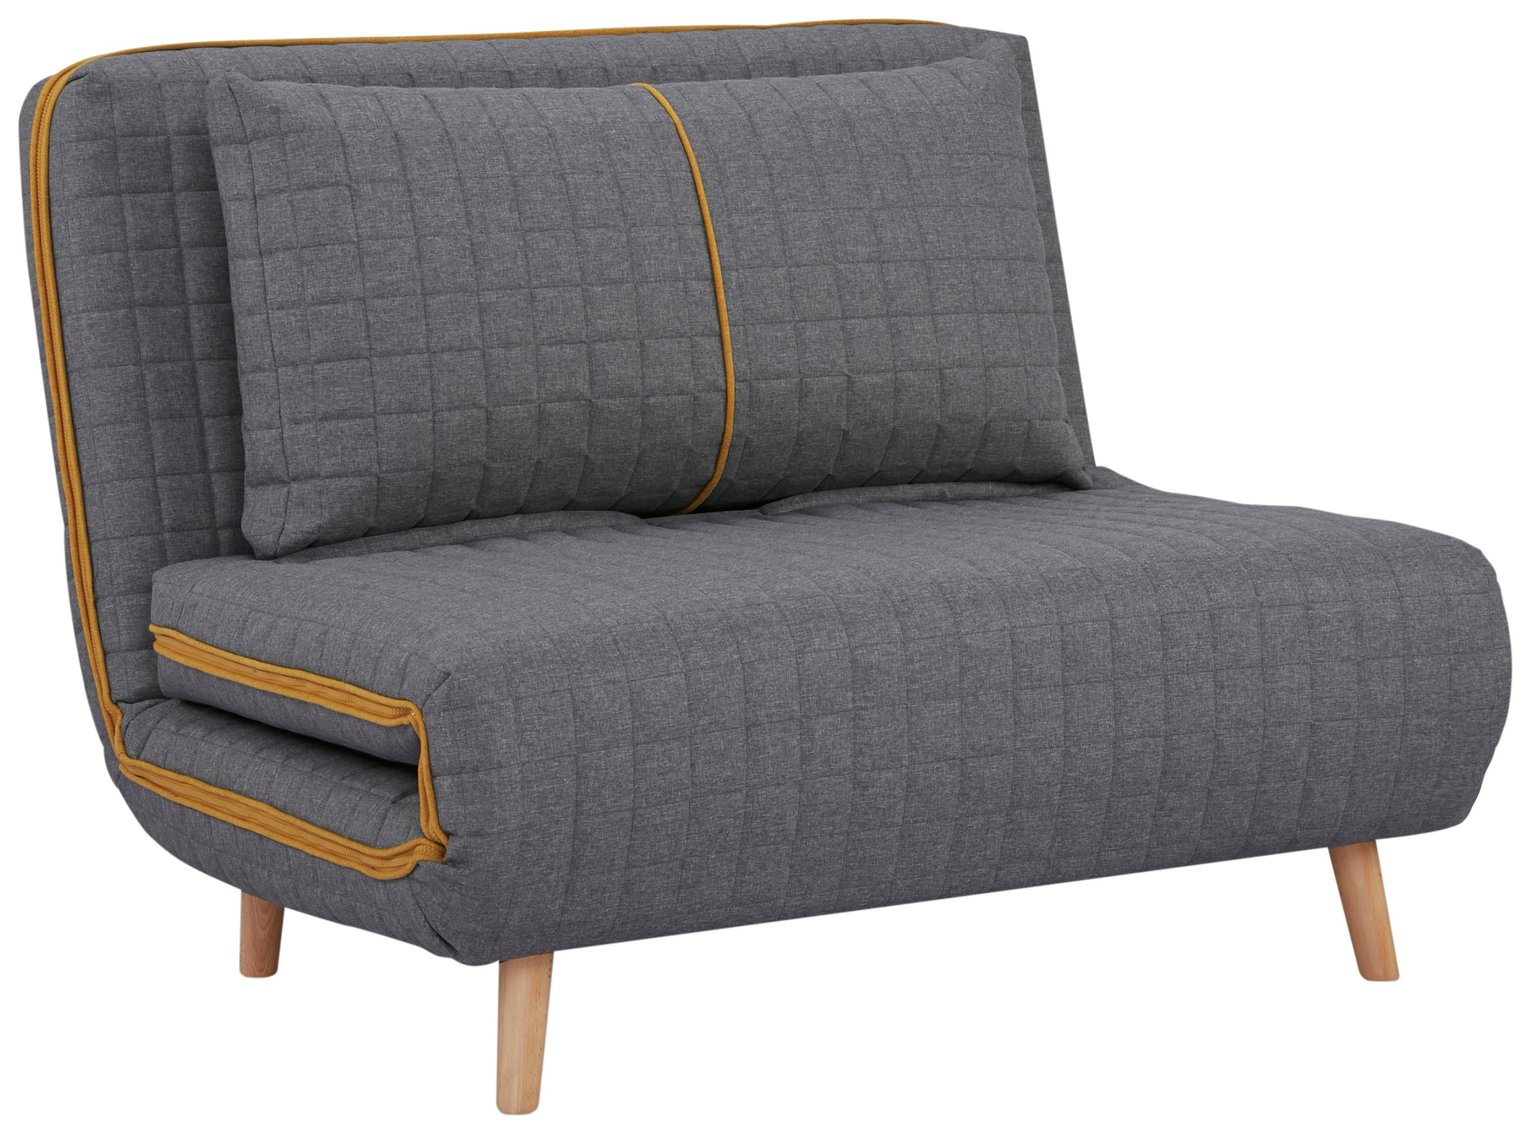 habitat roma small double quilted sofa bed